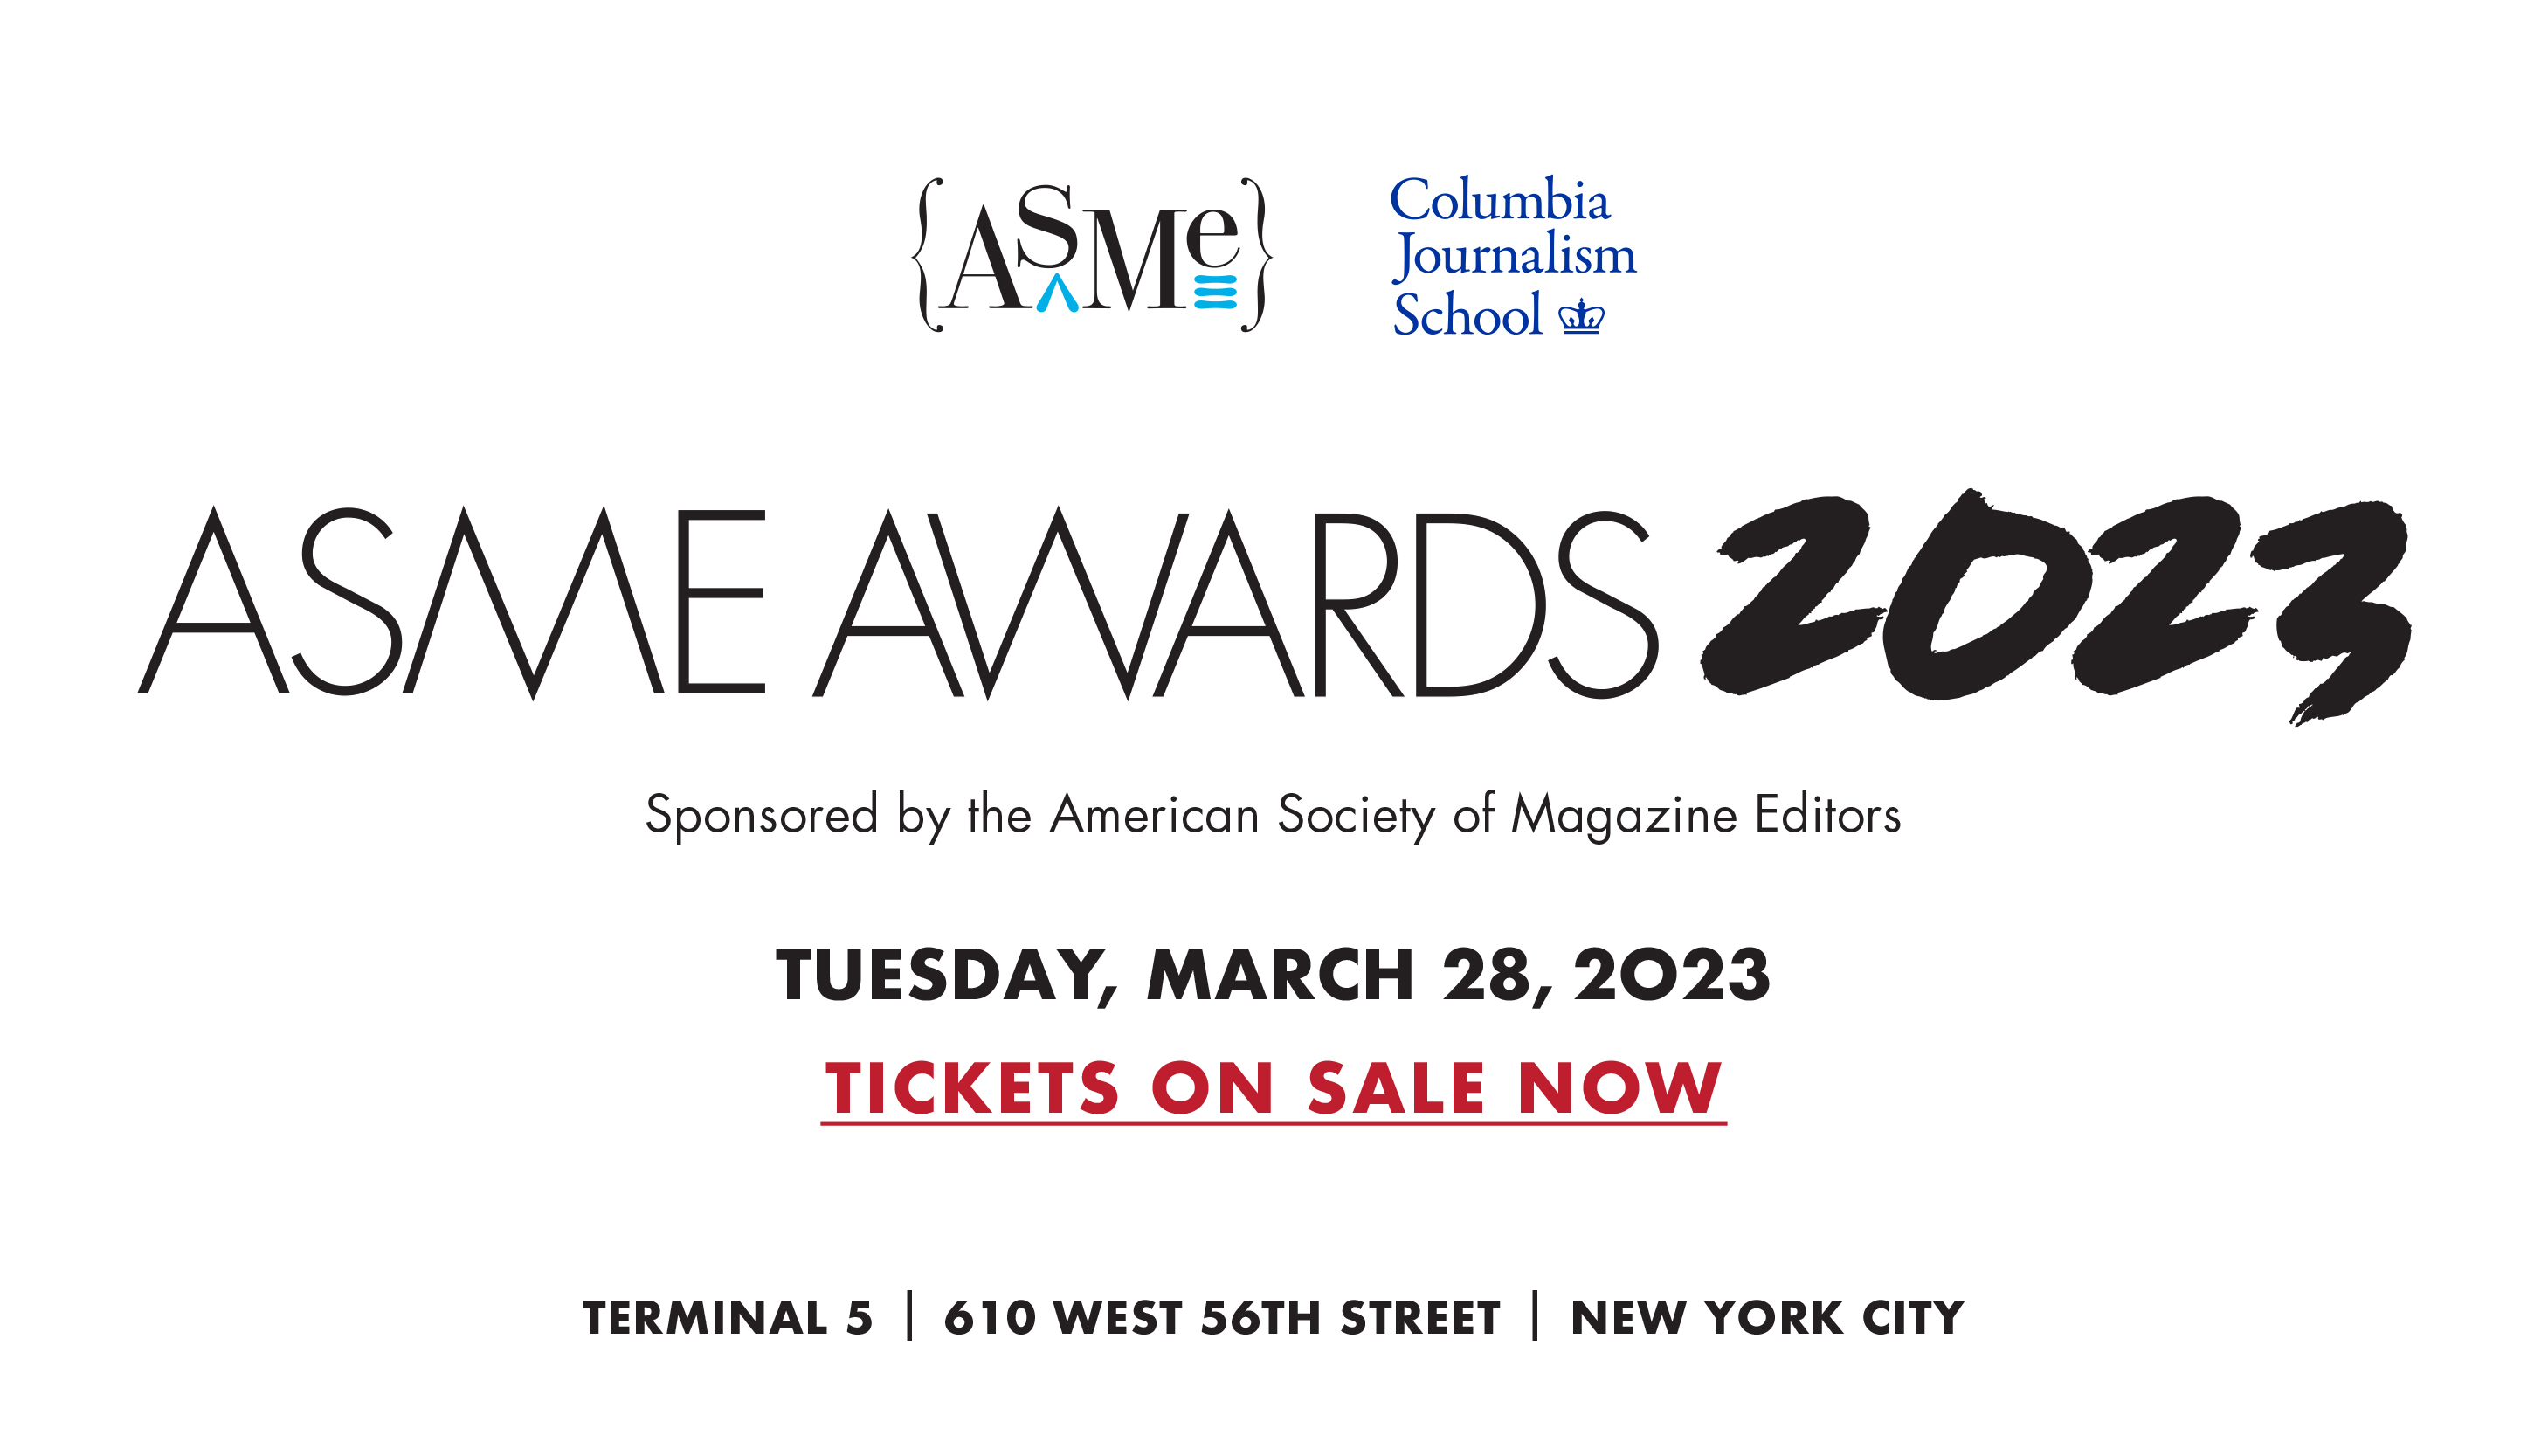 ASME Awards 2023 - Sponsored by the American Society of Magazine Editors - Tuesday, March 28, 2023